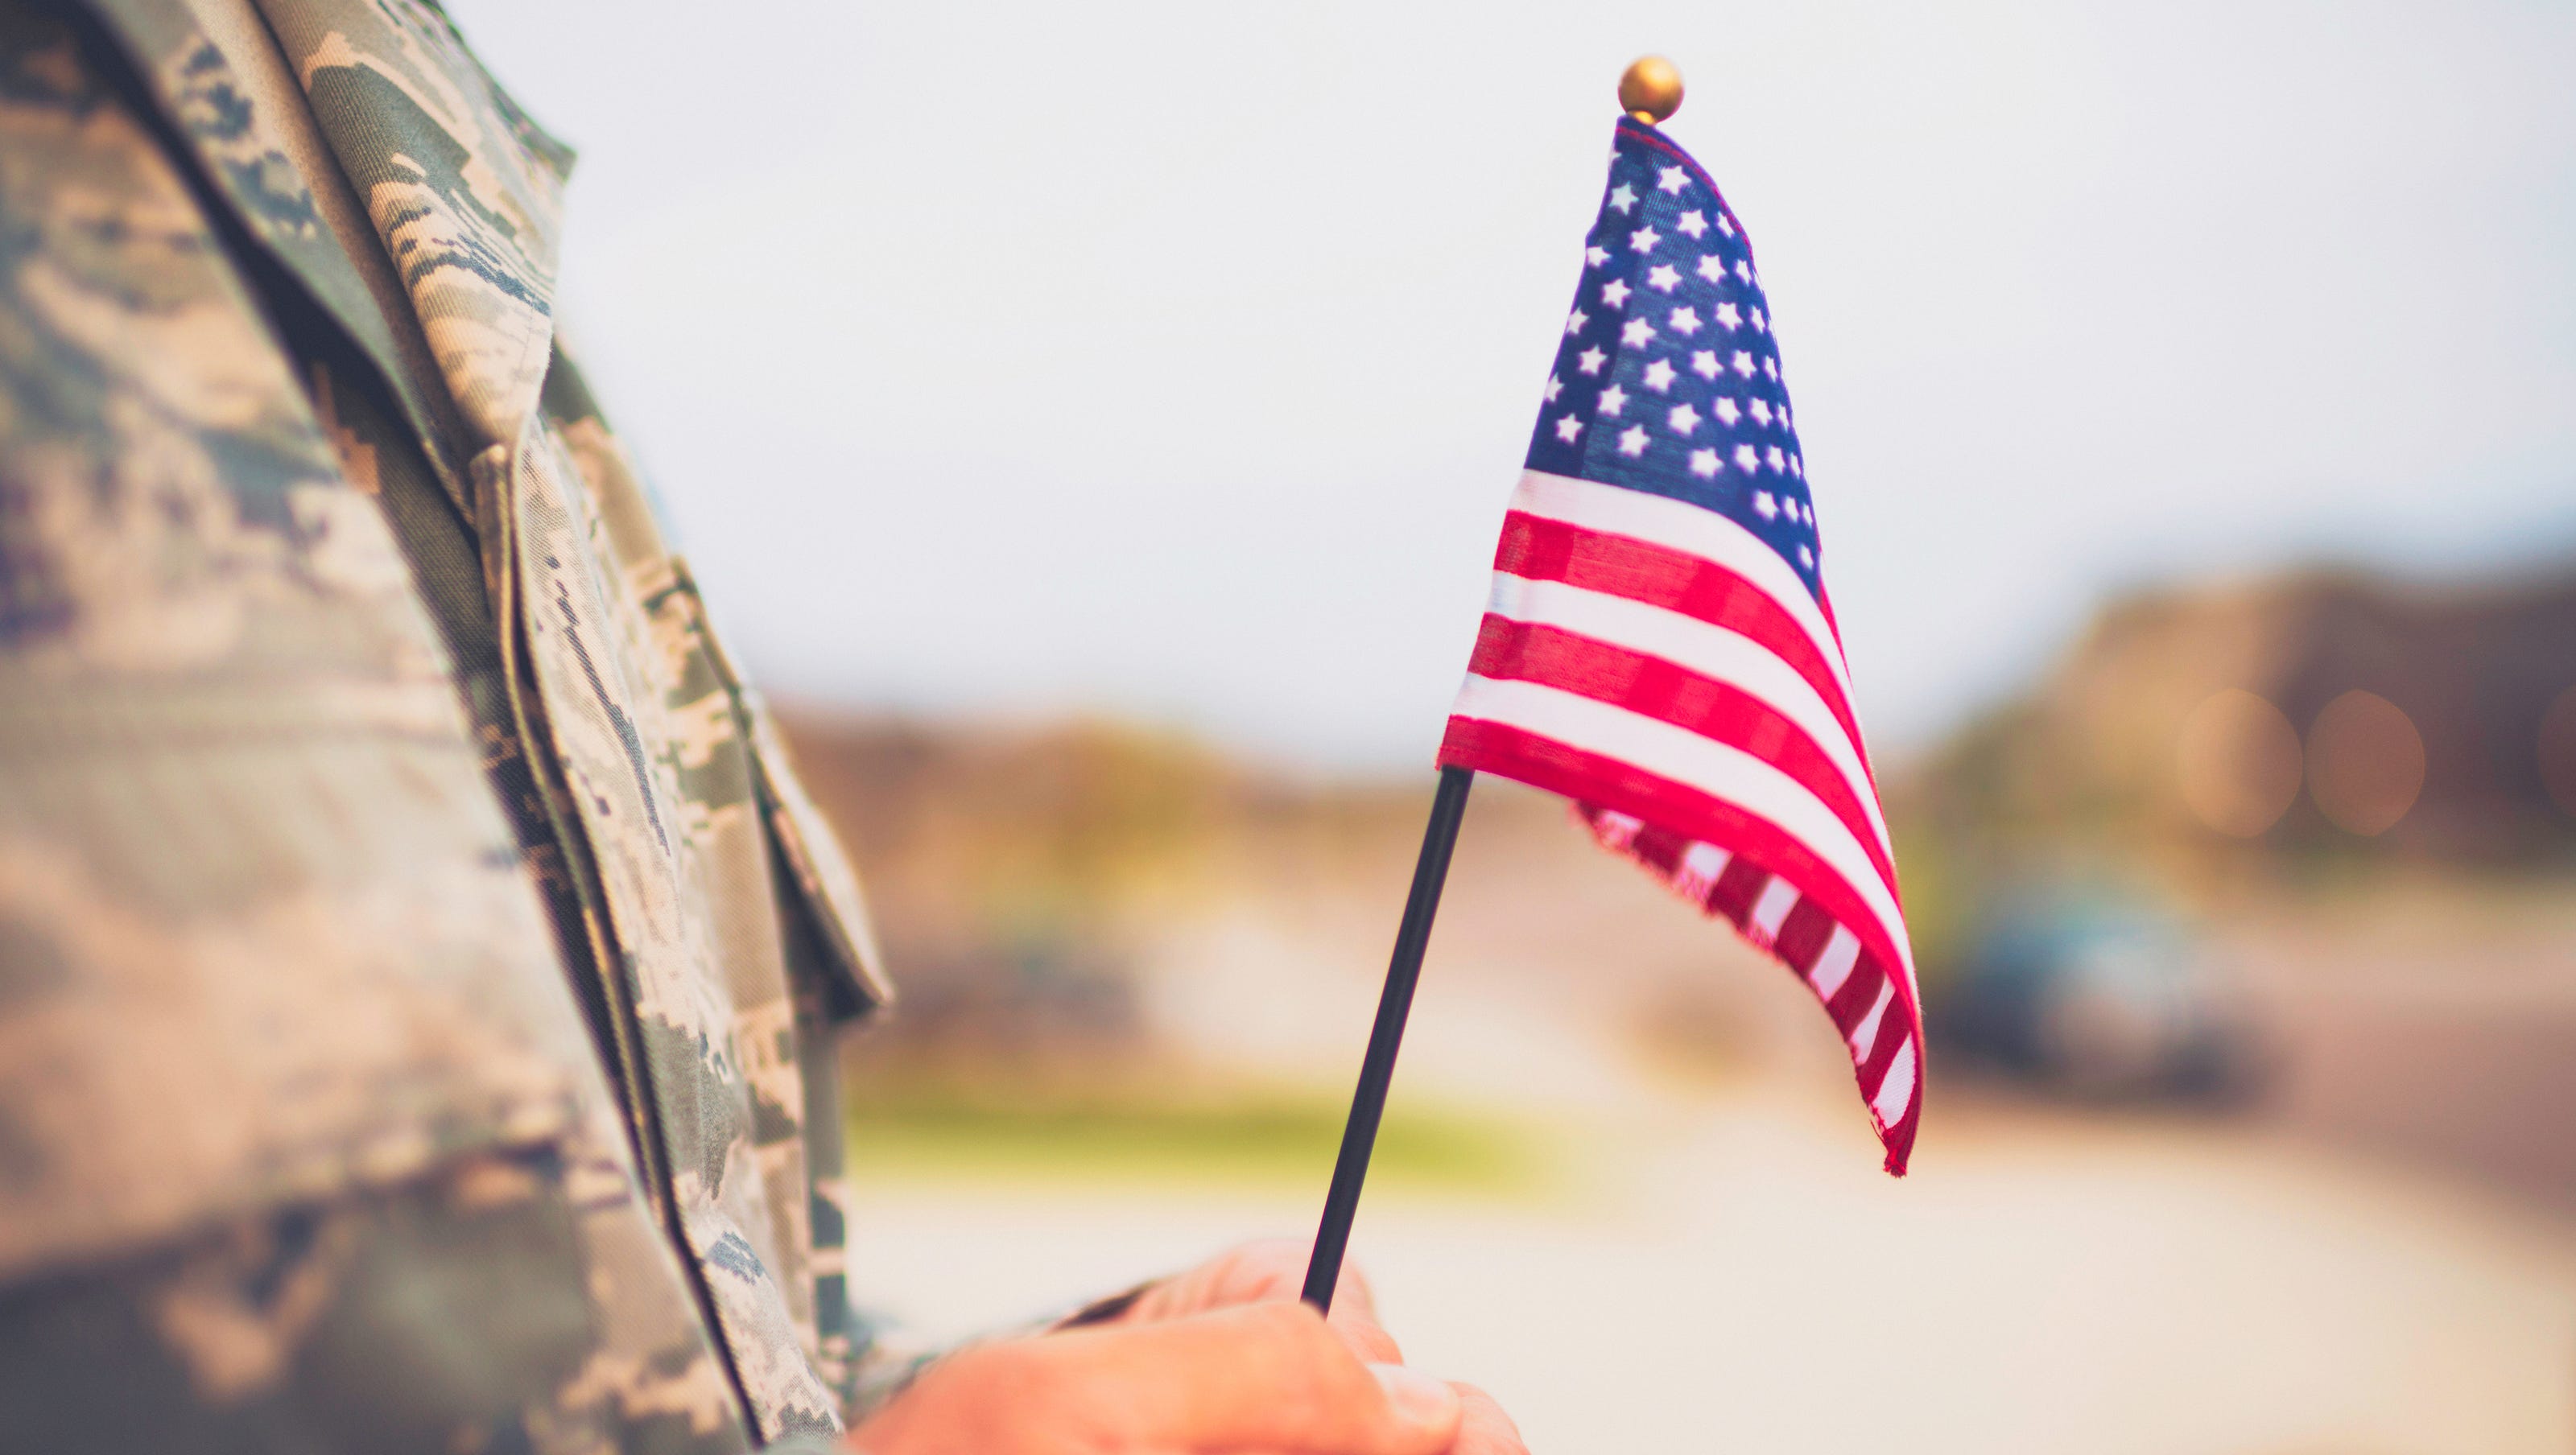 Veterans Day 2019 free meals, deals Starbucks, Dunkin', IHOP and more